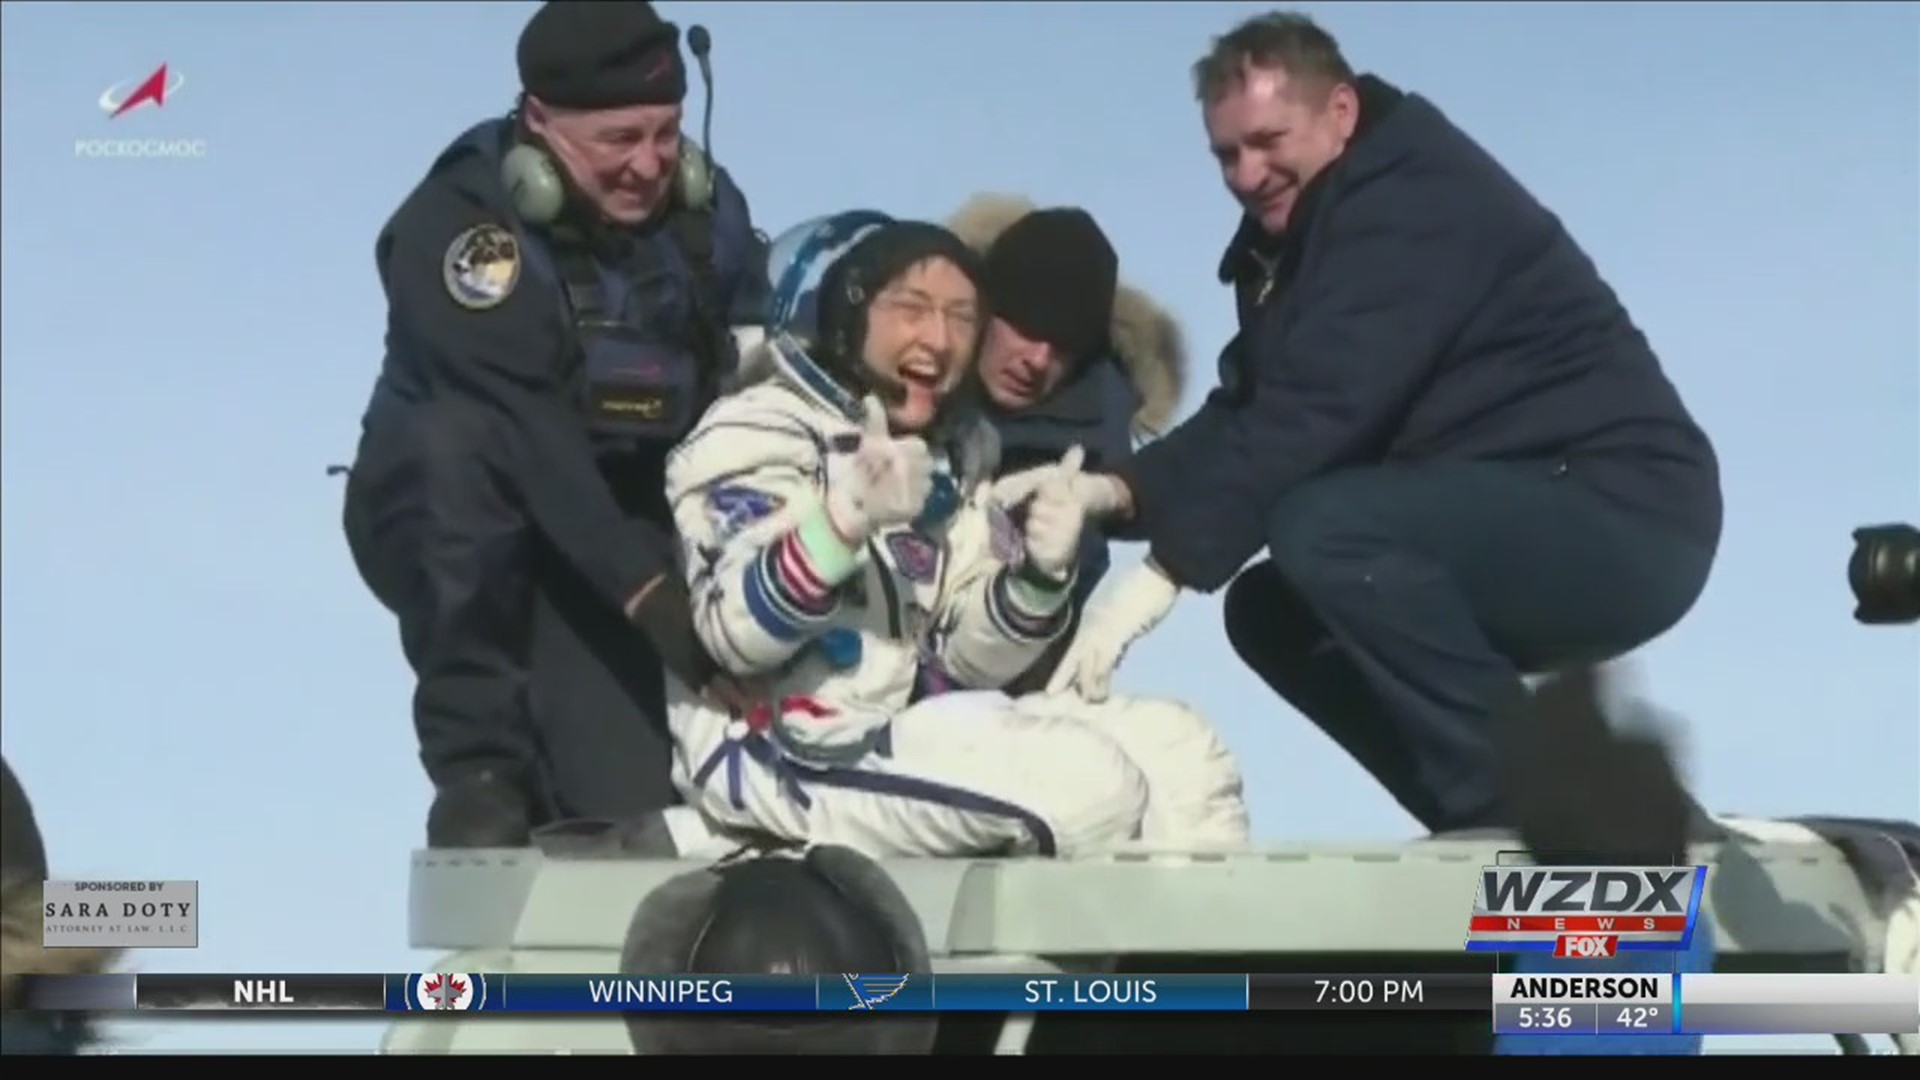 You are looking at the Soyuz capsule returning to Earth with an astronaut and two crewmates in Kazahkstan today. Among the crew that landed was Christina Koch, who spent nearly 11 months in orbit.